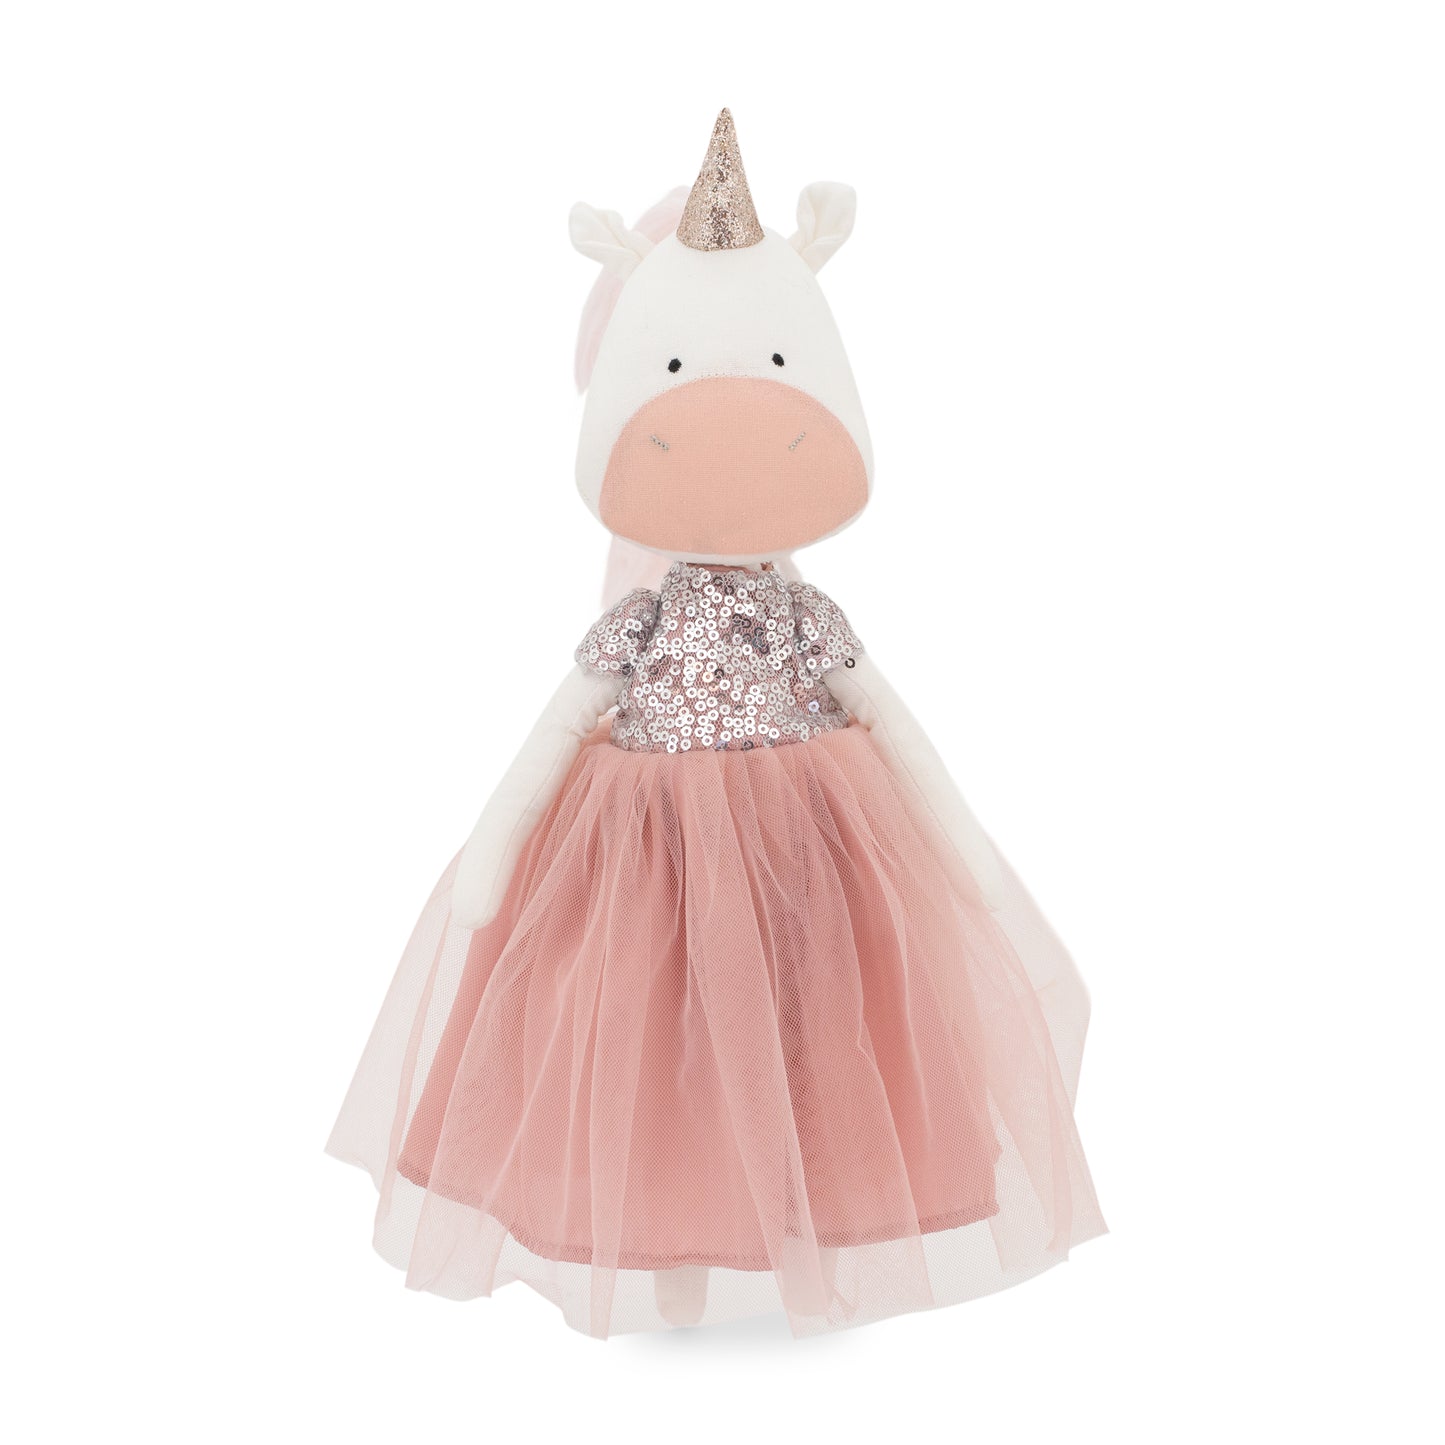 Daphne the Unicorn: Pink Dress with Sequins